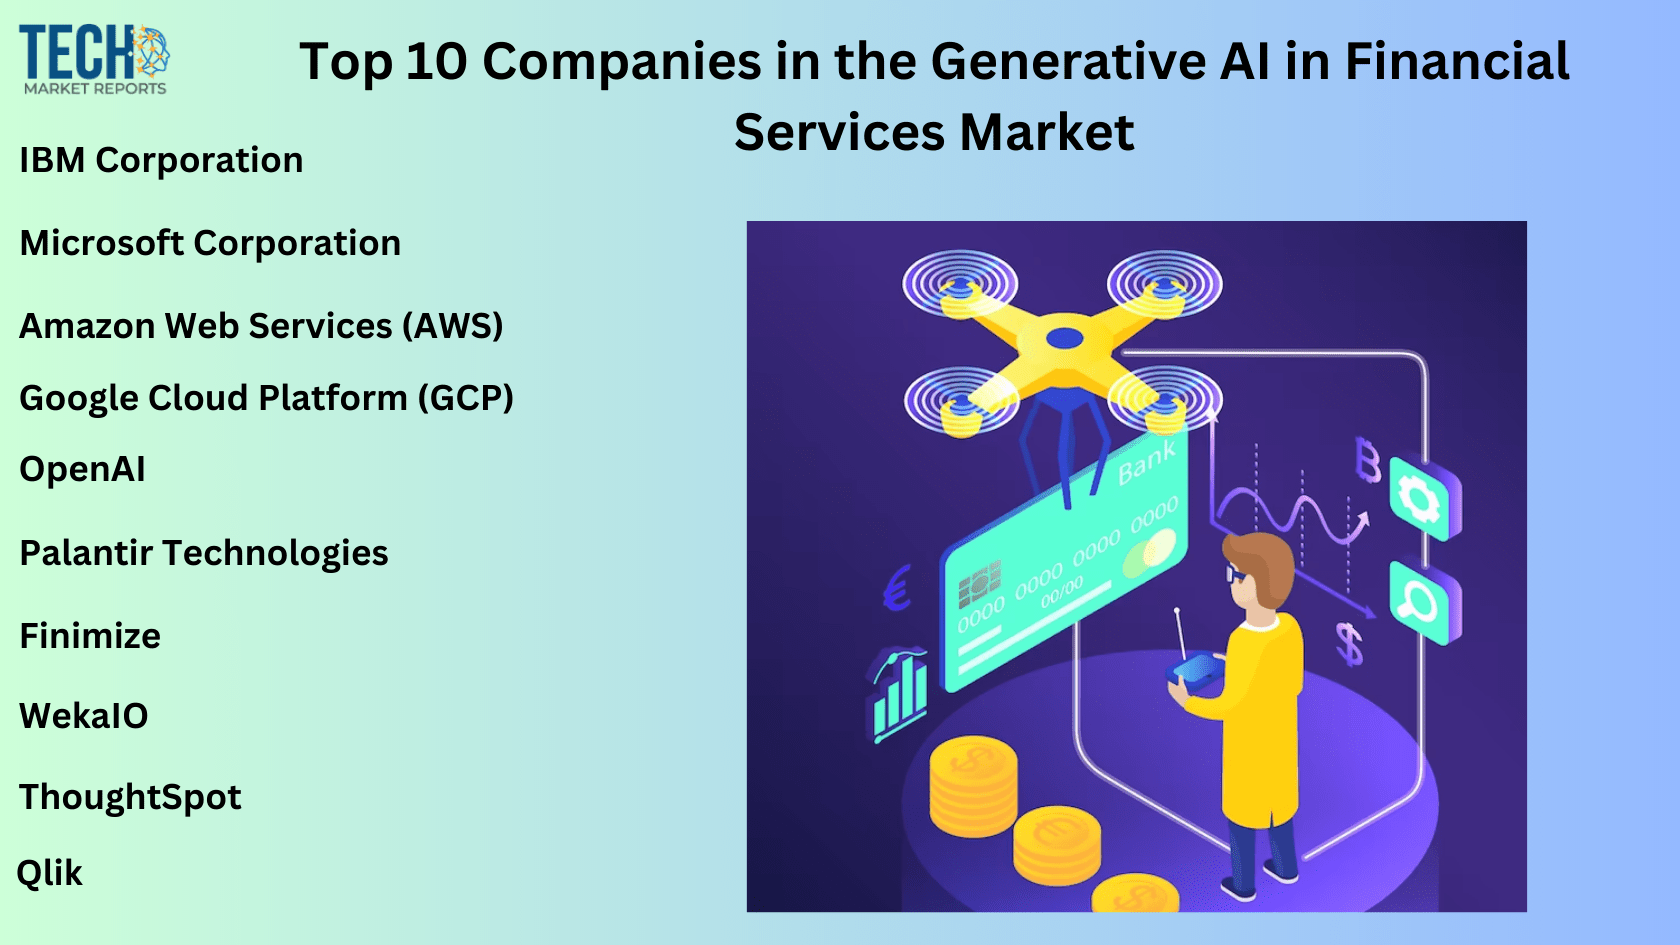 Top 10 Companies in the Generative AI in Financial Services Market